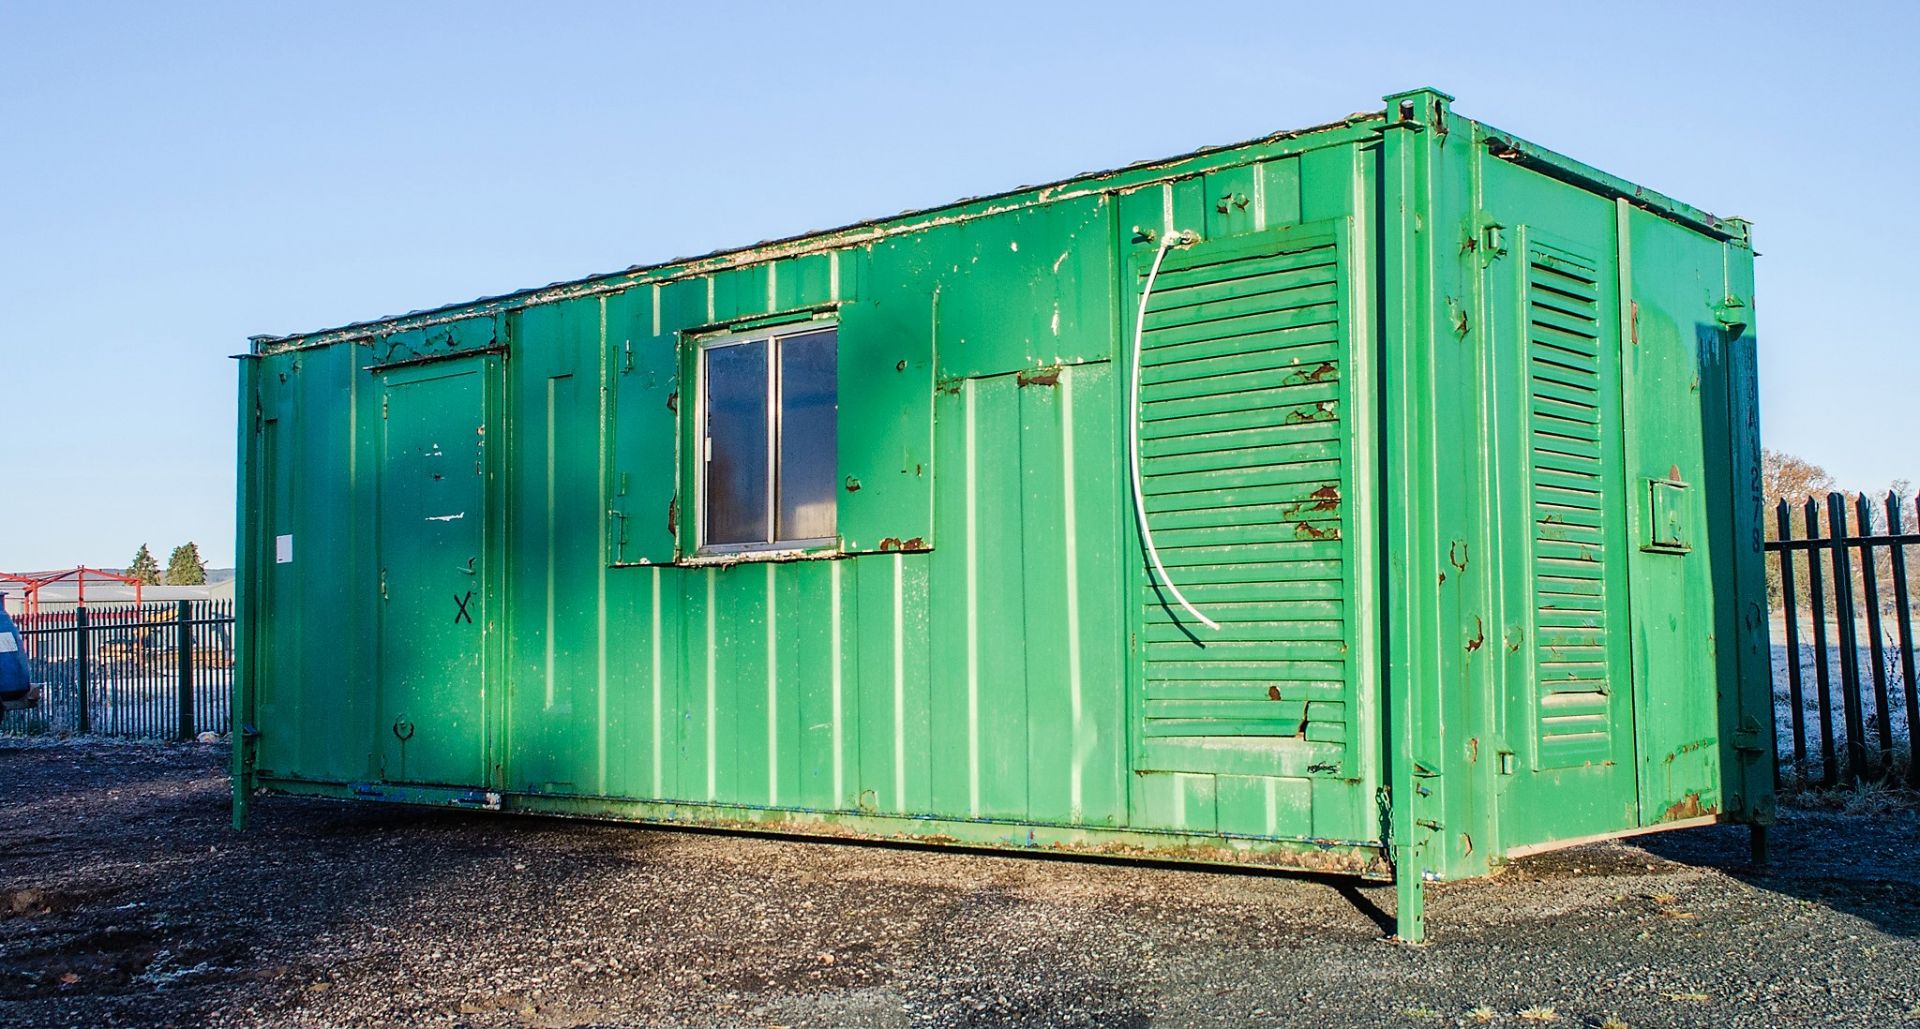 24' x 9' anti vandal steel welfare unit comprising; generator room, canteen area, drying room and - Image 2 of 11